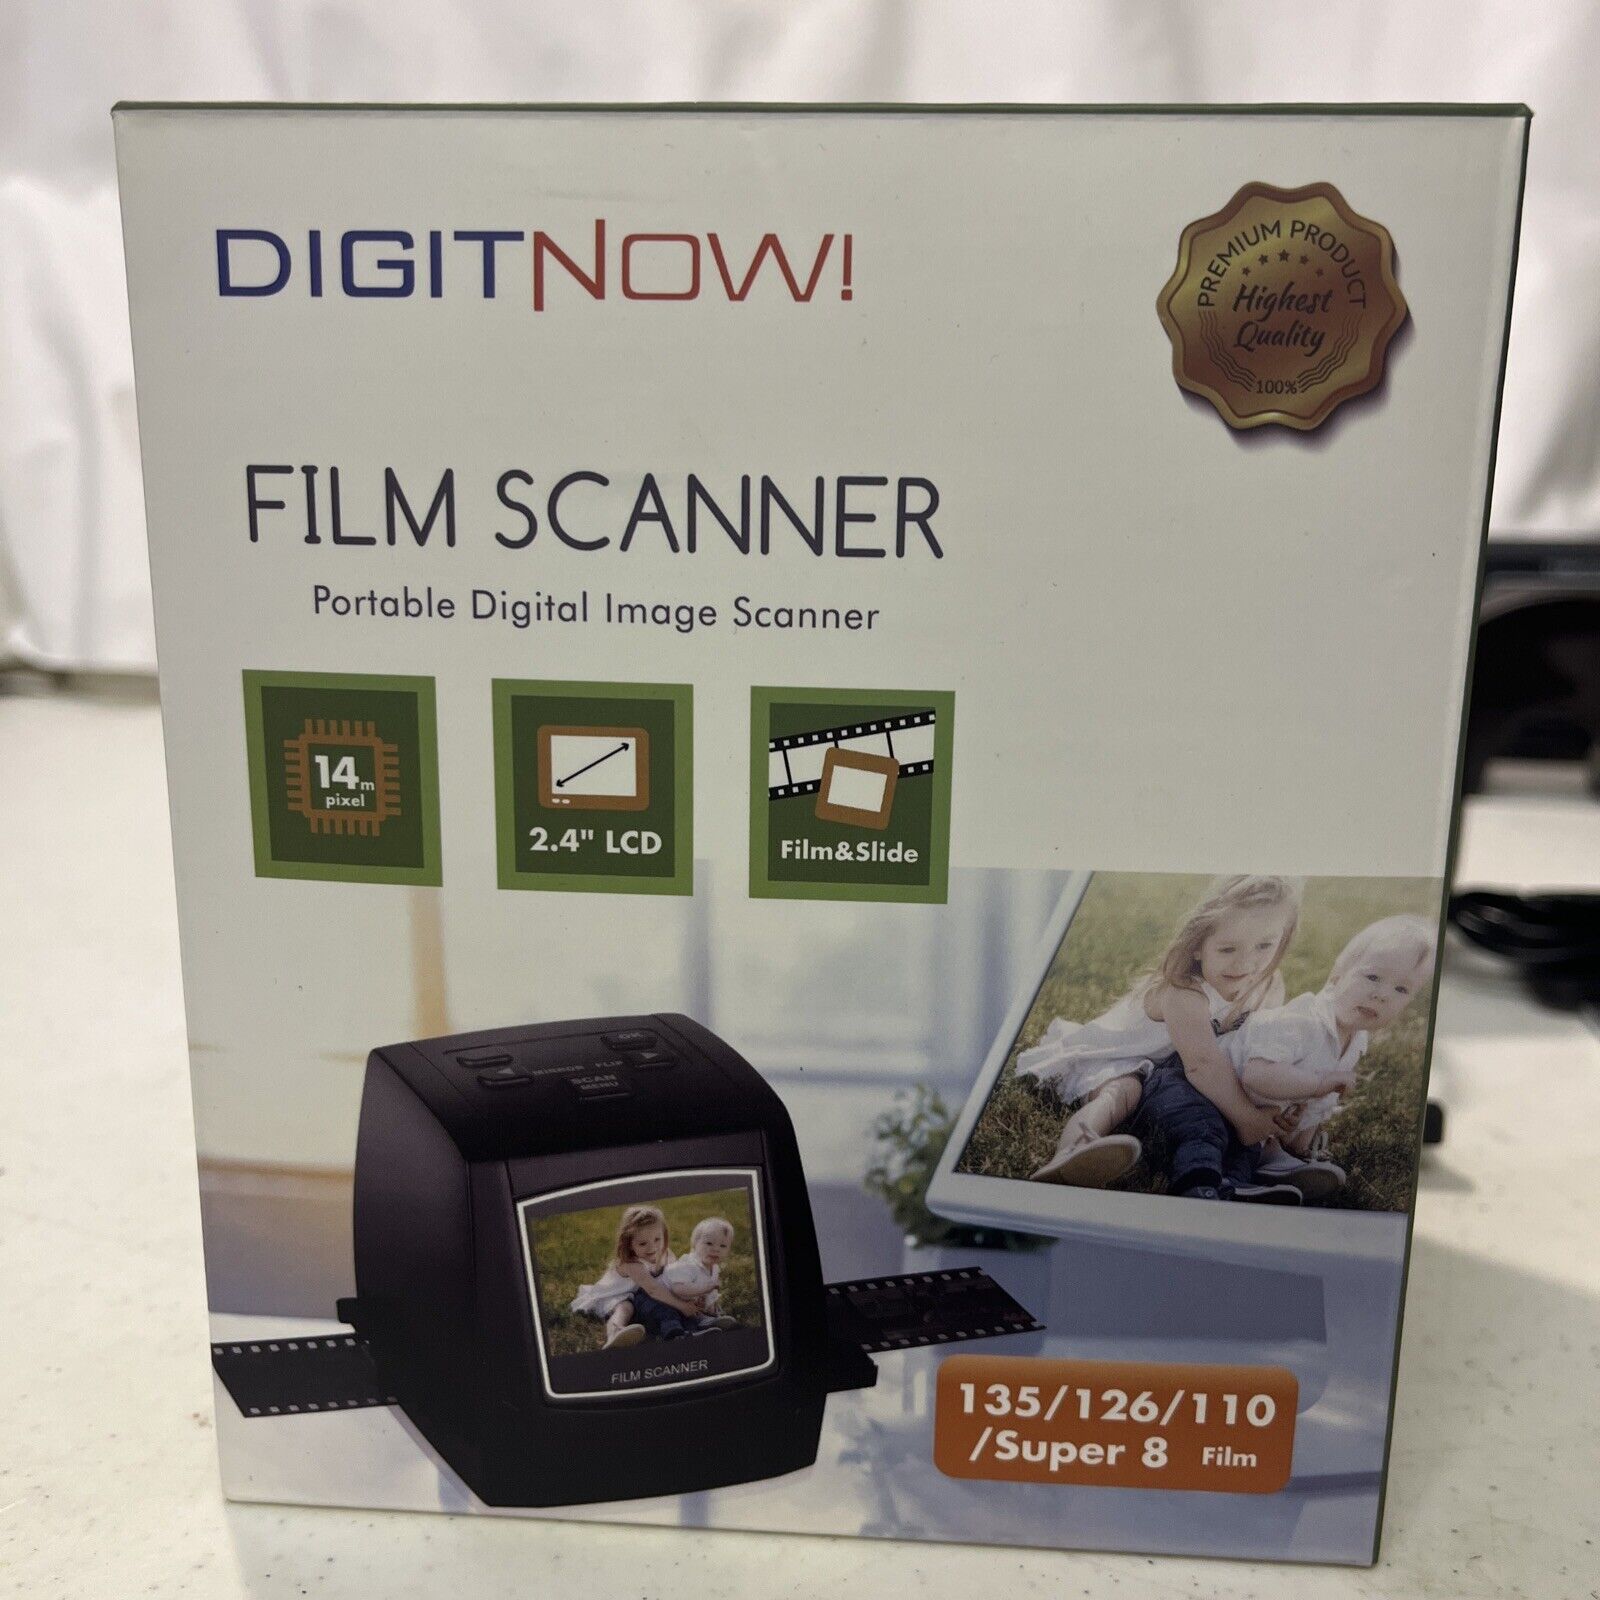 DIGITNOW 14MP All-in-1 Film & Slide Scanner, Converts 135 110 126 and Super 8 